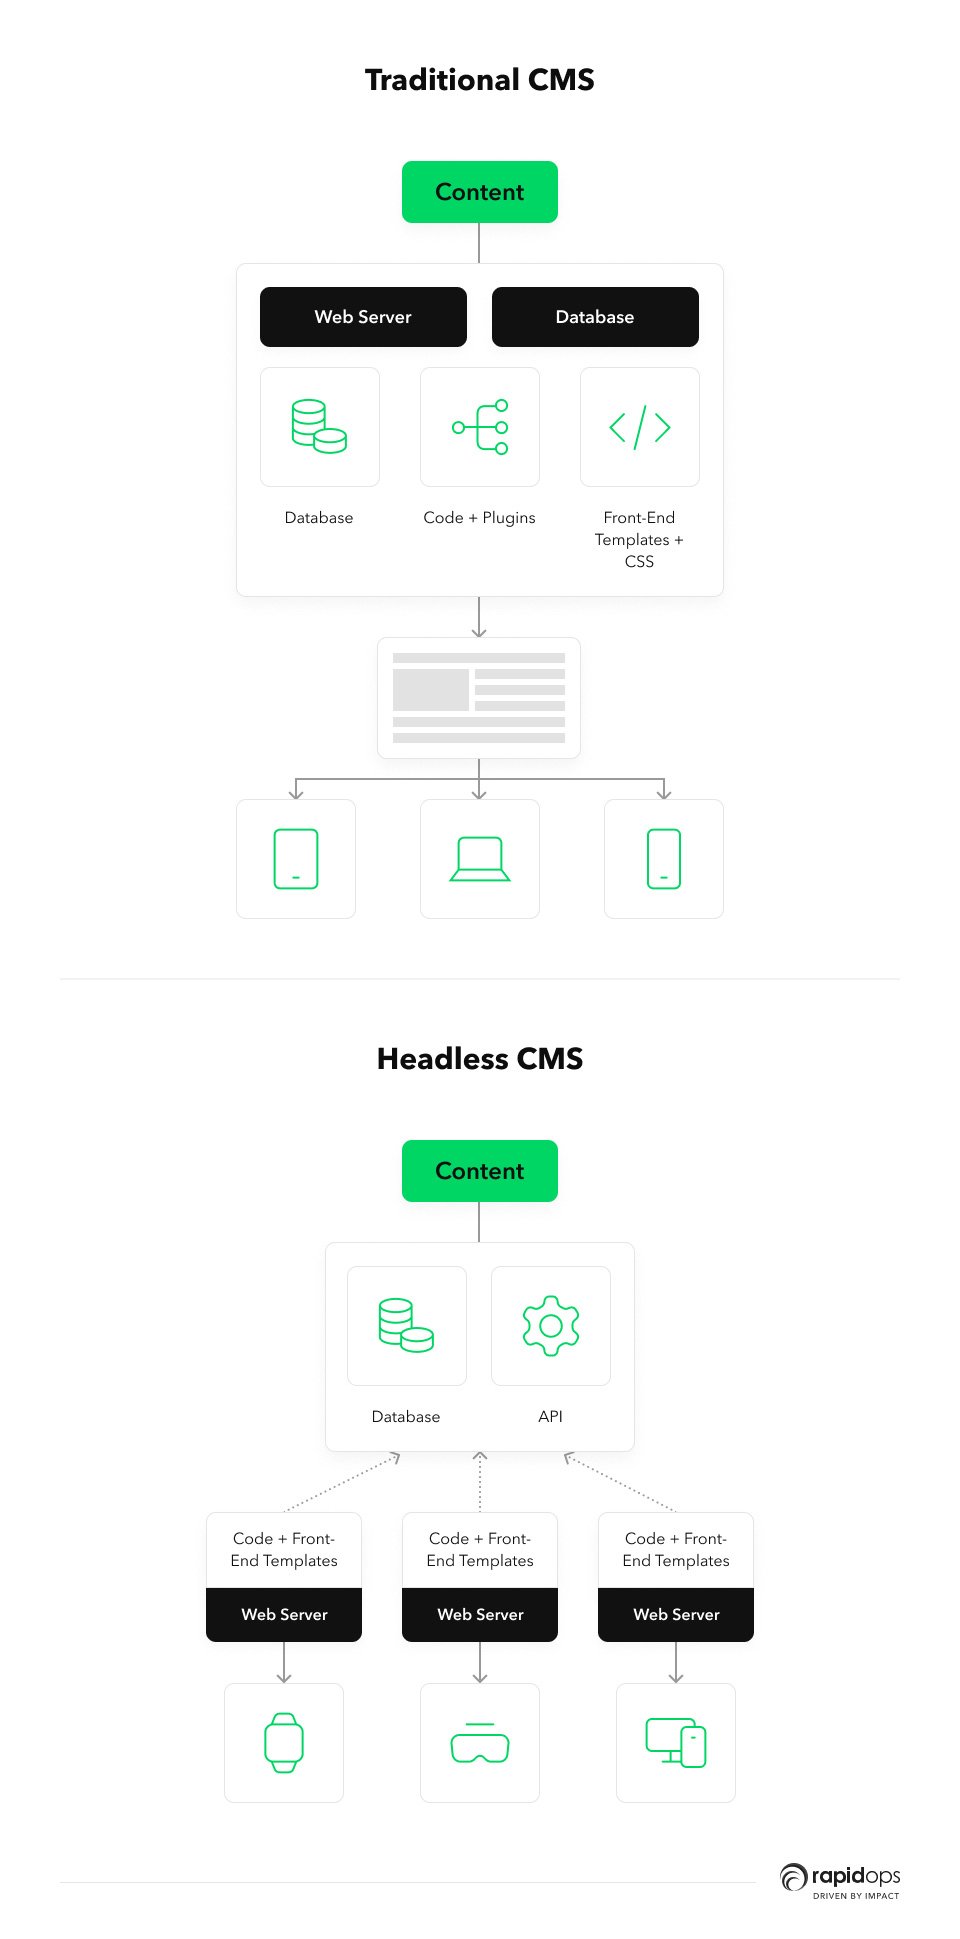 difference between traditional and headless CMS